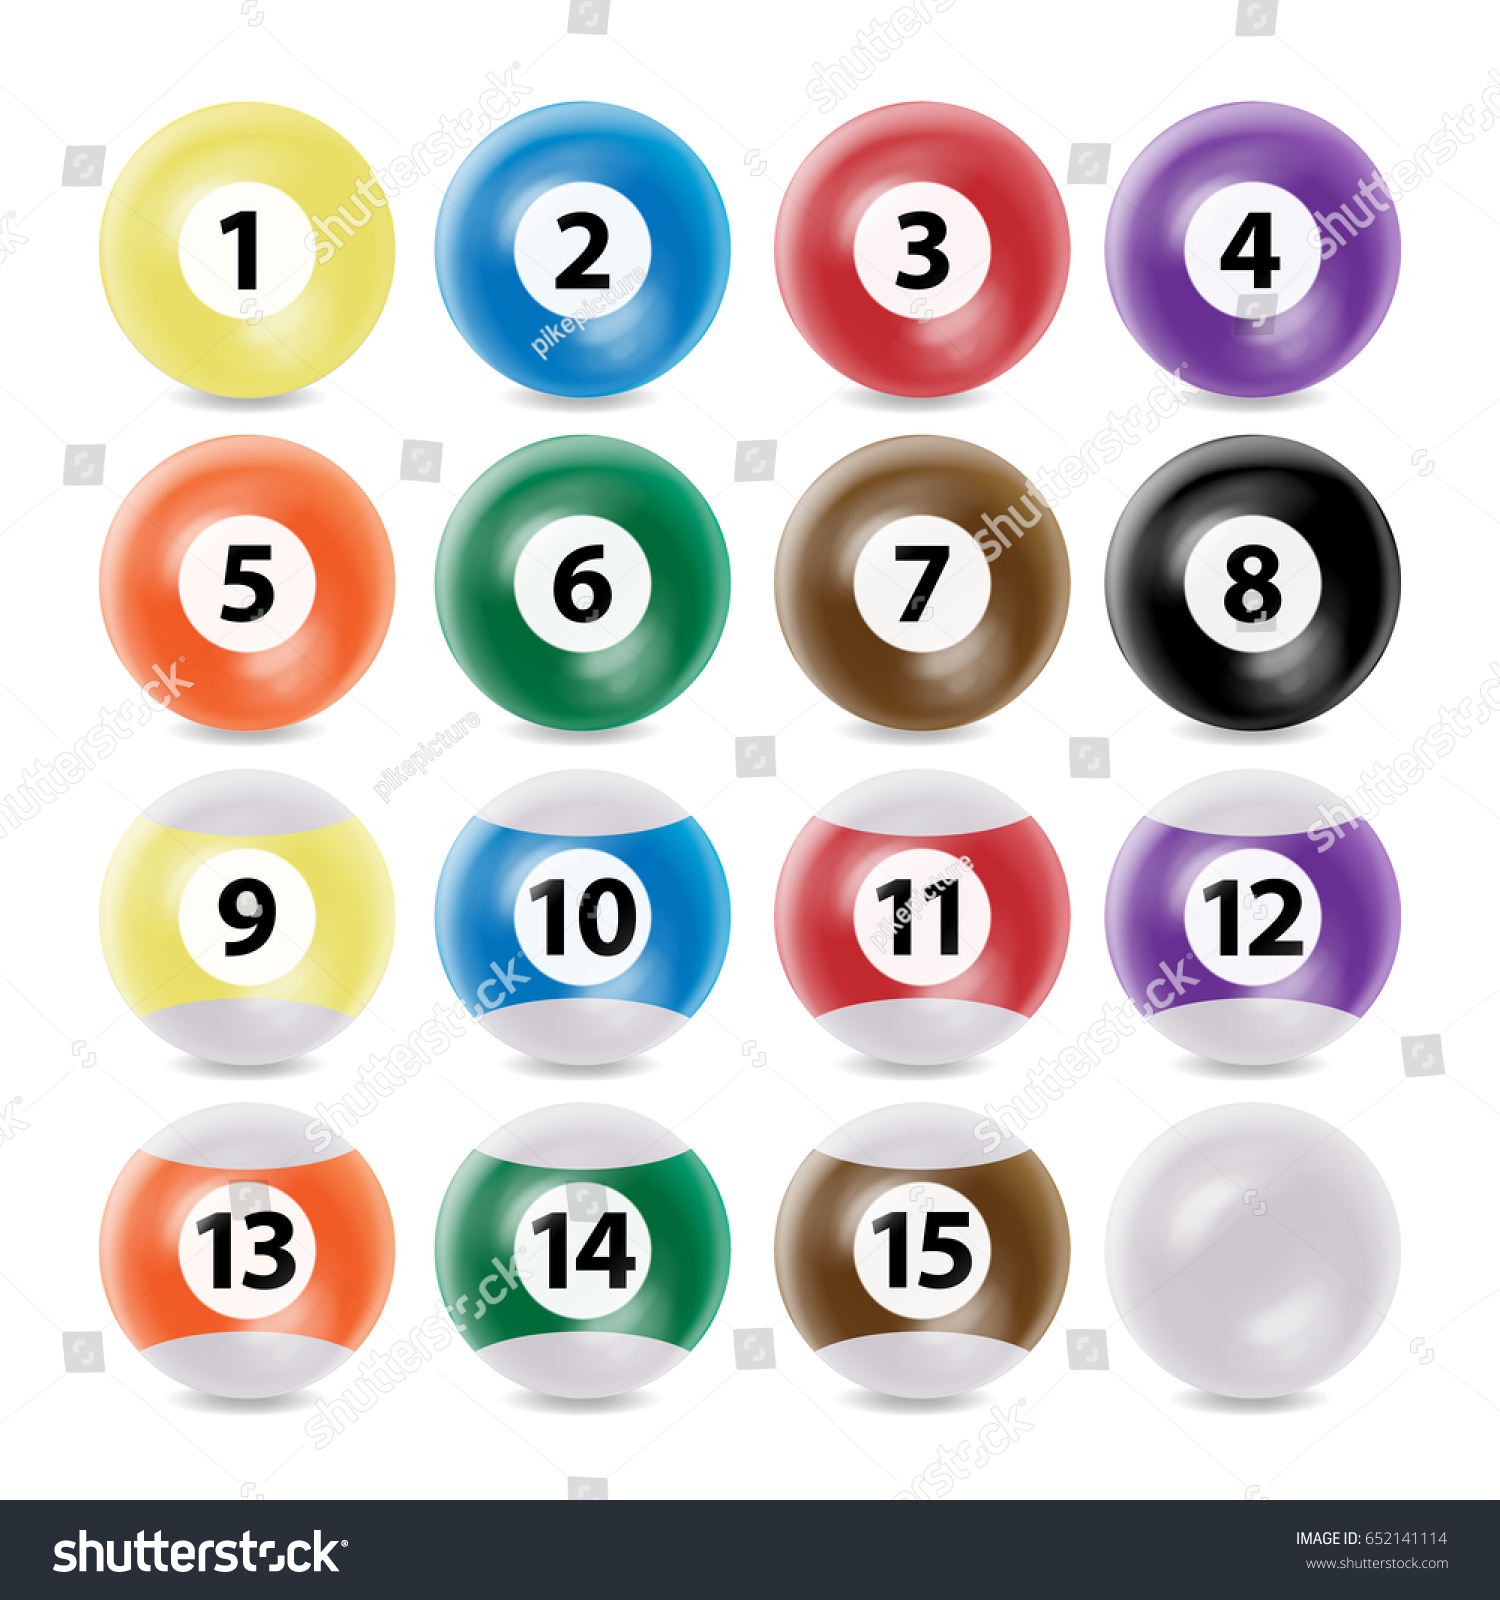 Billiard Ball Set Realistic Commonly Used Stock Illustration 652141114 ...